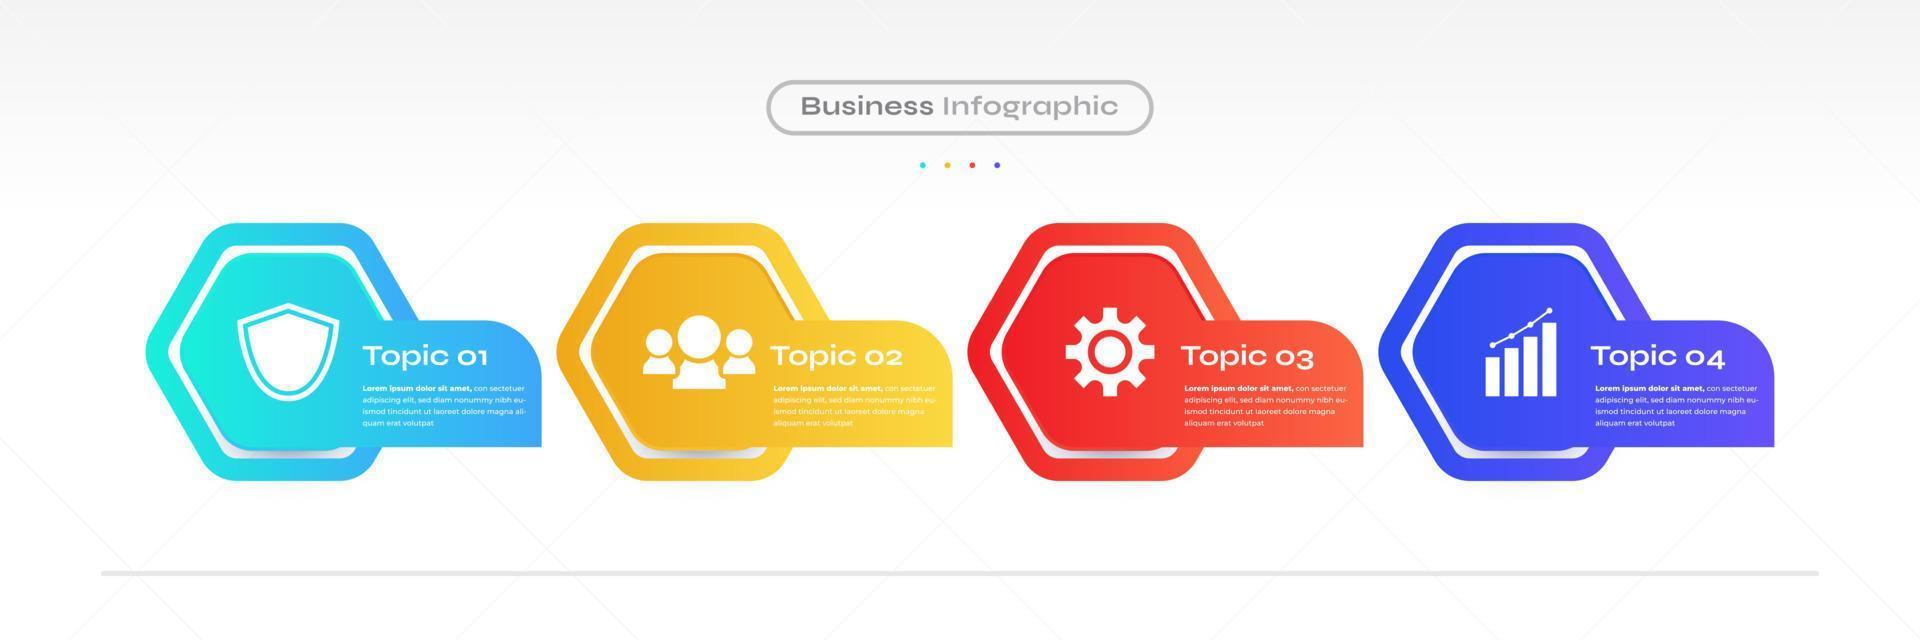 Modern Infographic Design Template with 4 Options or Steps. Can be used for Presentation, Workflow Layout, Diagram, or Annual Report. Timeline Diagram Presentation Design vector